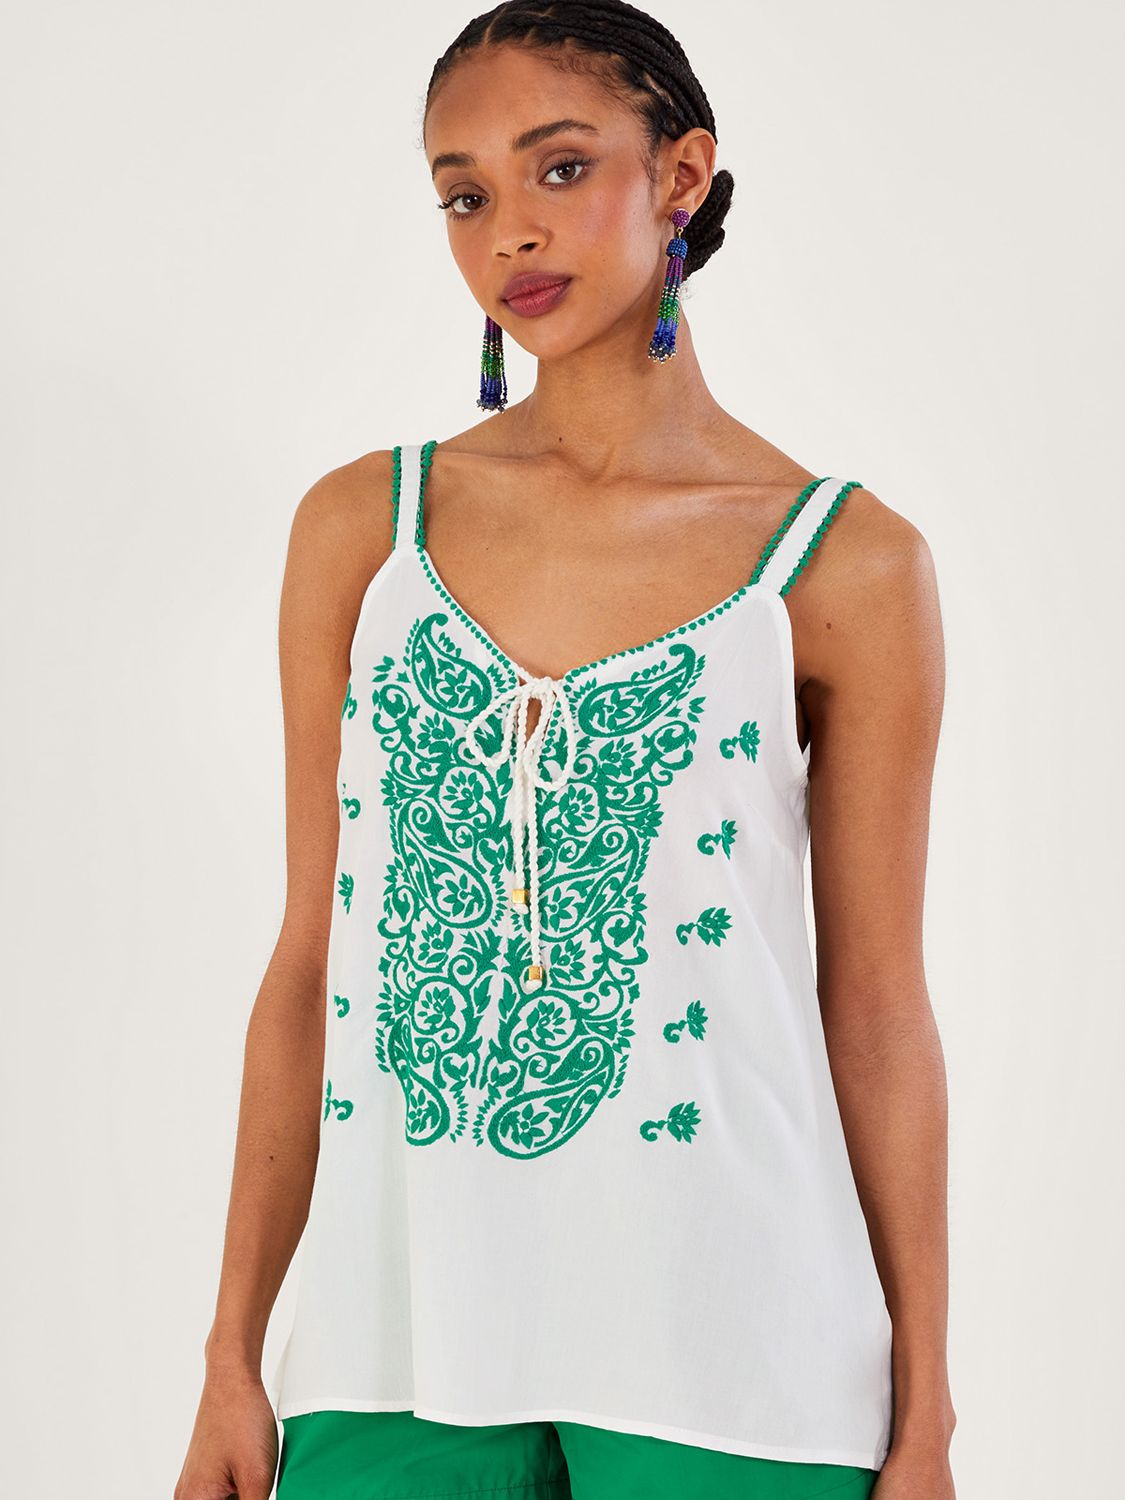 Monsoon Embroidered Paisley Floral Cami Top, Green, S